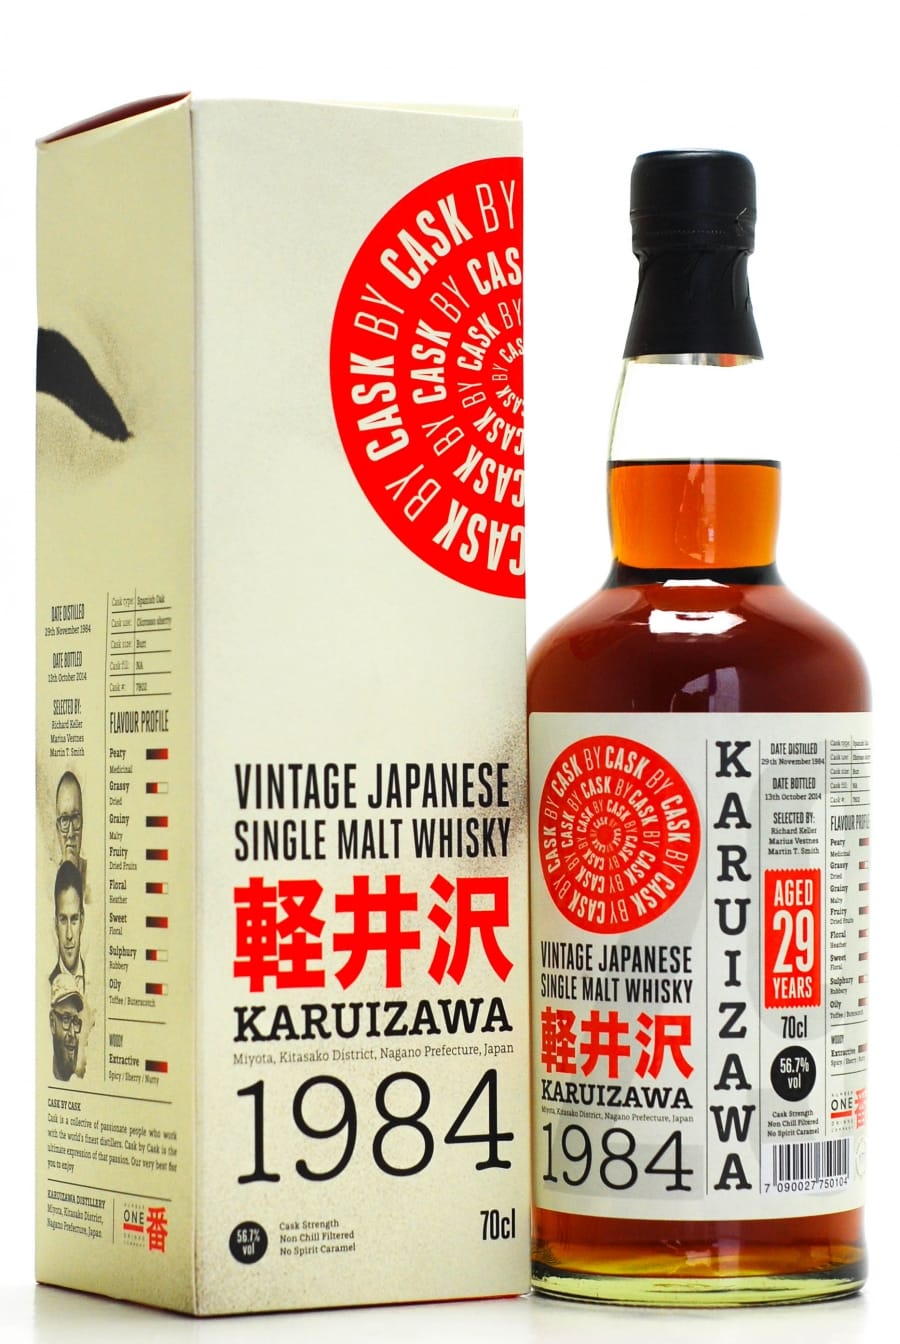 Karuizawa - 29 Years Old Cask By Cask:7802 For Cask Norway AS and Cask of Sweden 56.7% 1984